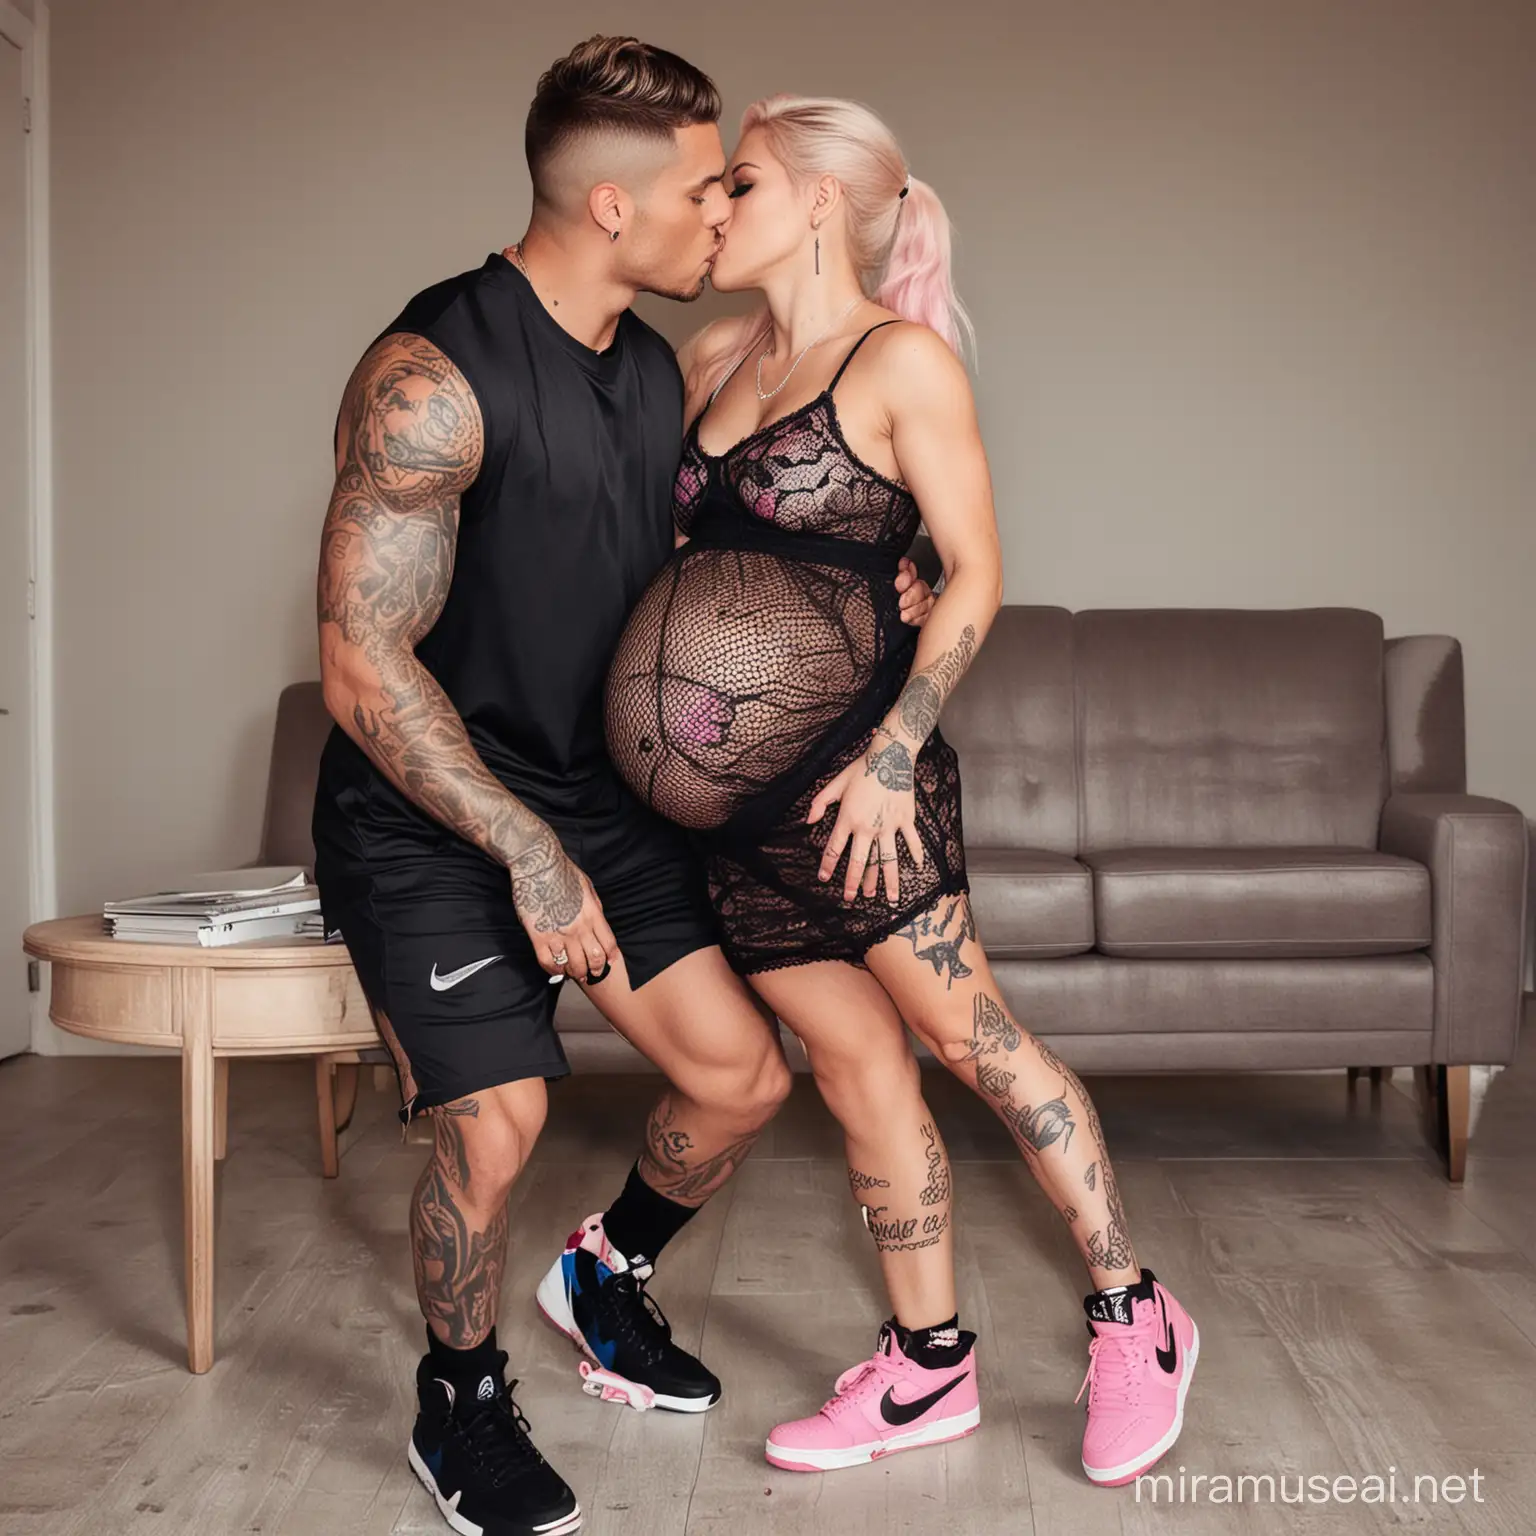 Romantic Pregnancy Photoshoot Blonde and PinkHaired Expectant Mother Kisses Muscular Footballer Husband